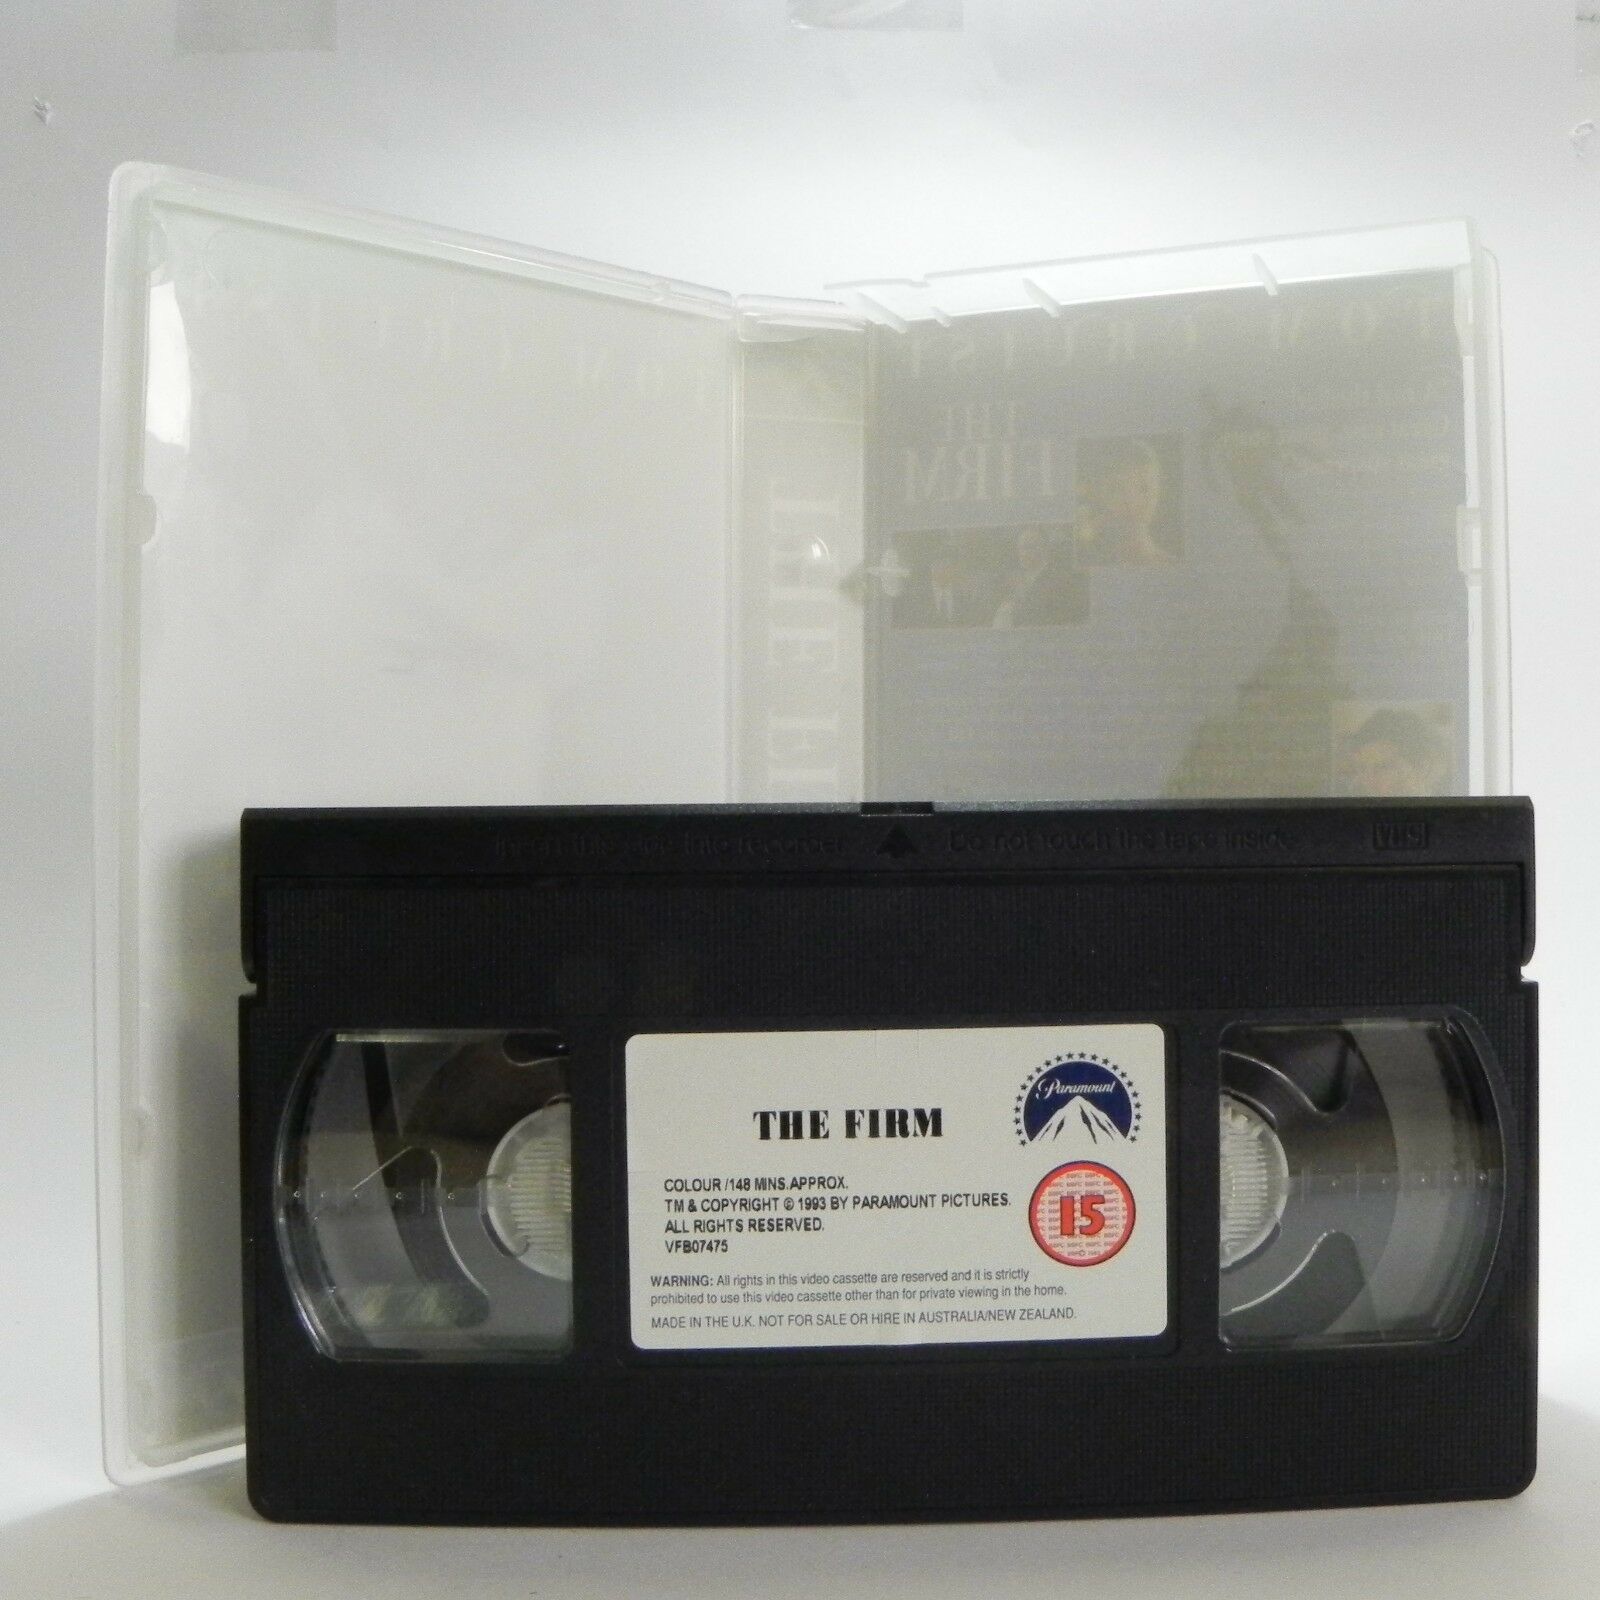 The Firm: S.Pollack Film - Thriller (1993) - Great Suspense - T.Cruise - VHS-